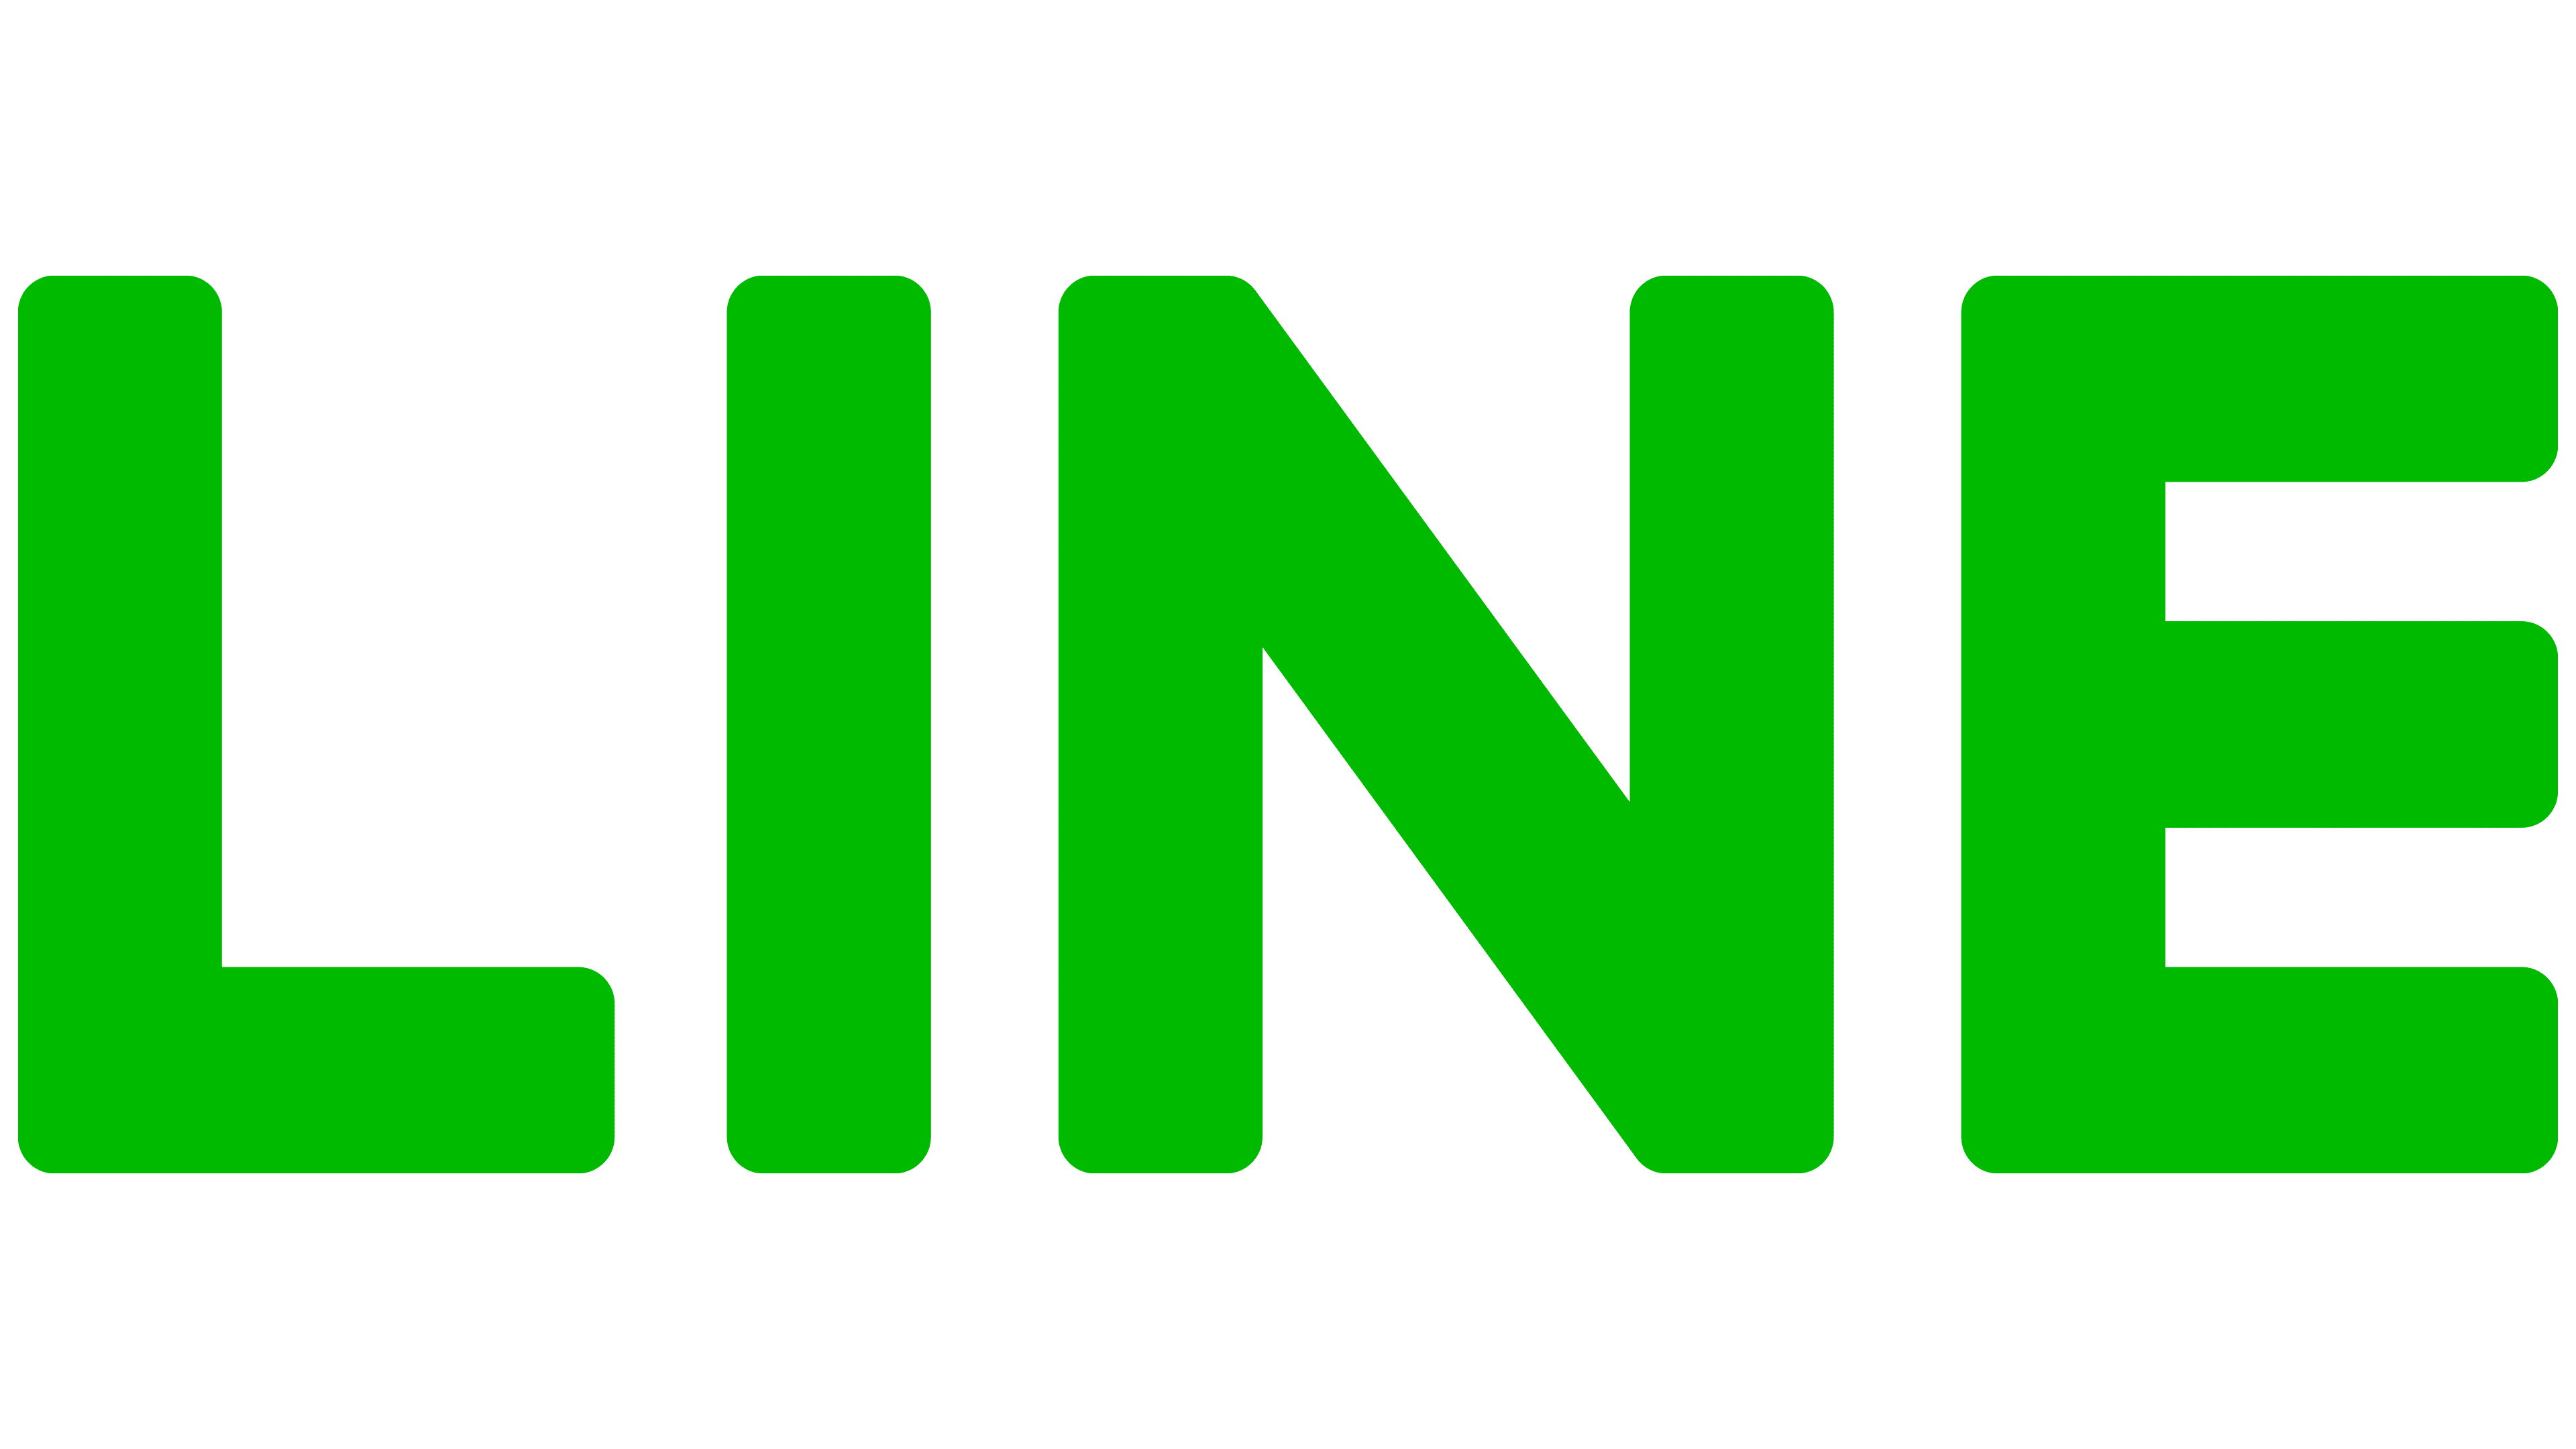 Line Logo, symbol, meaning, history, PNG